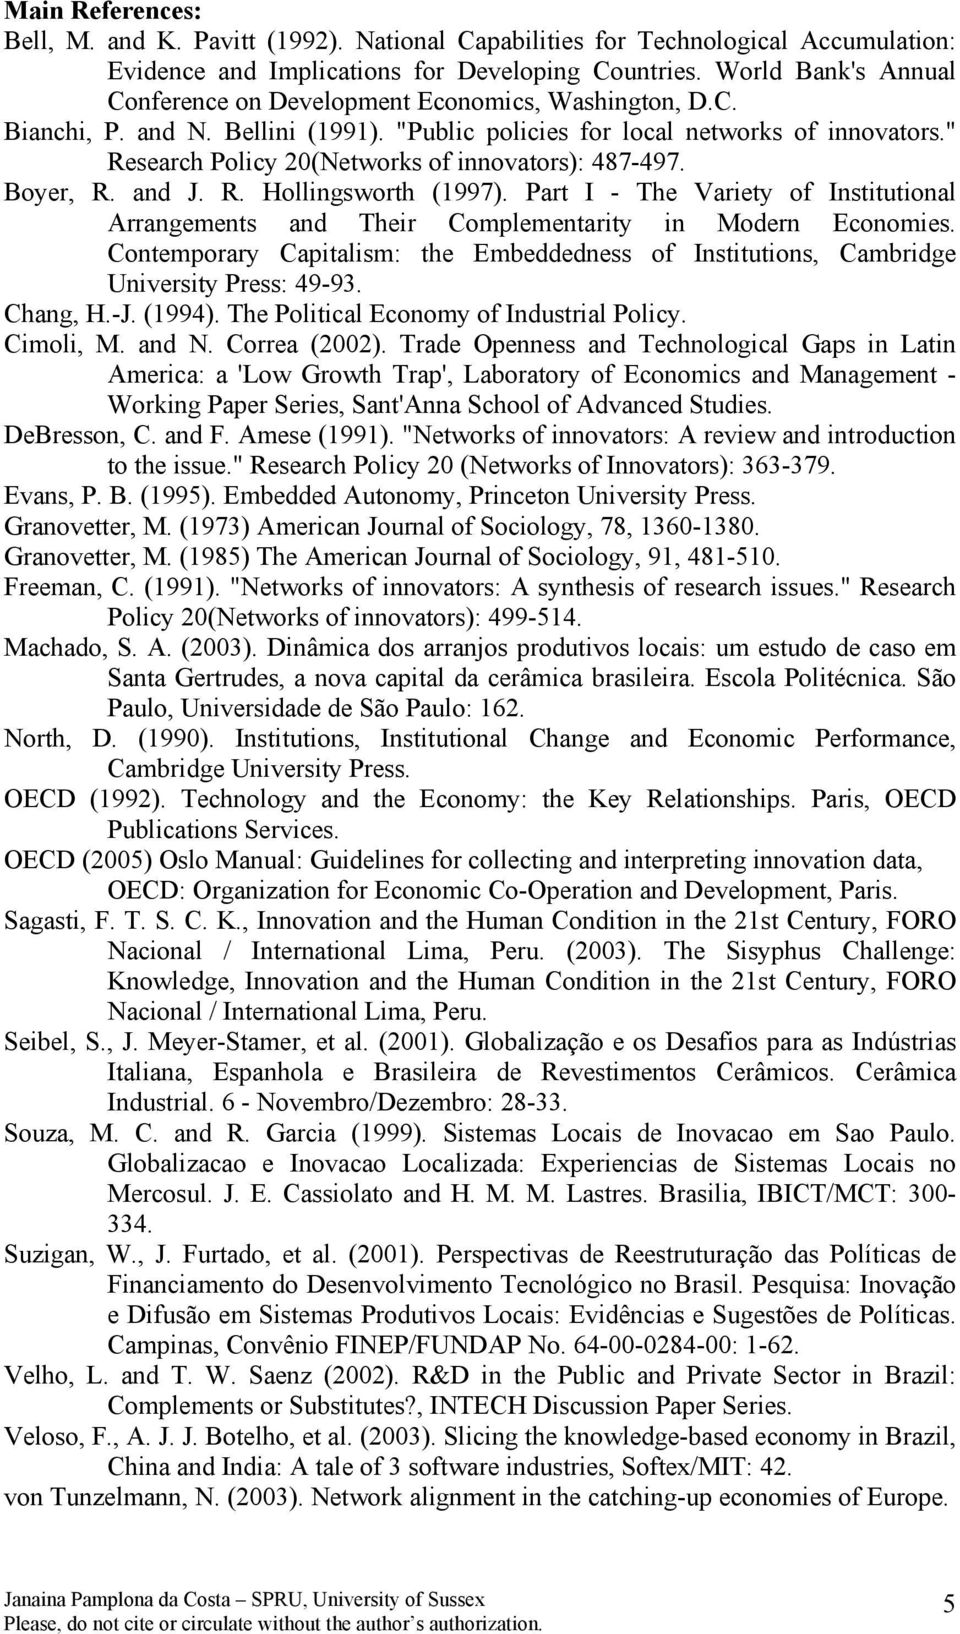 " Research Policy 20(s of innovators): 487-497. Boyer, R. and J. R. Hollingsworth (1997). Part I - The Variety of Institutional Arrangements and Their Complementarity in Modern Economies.